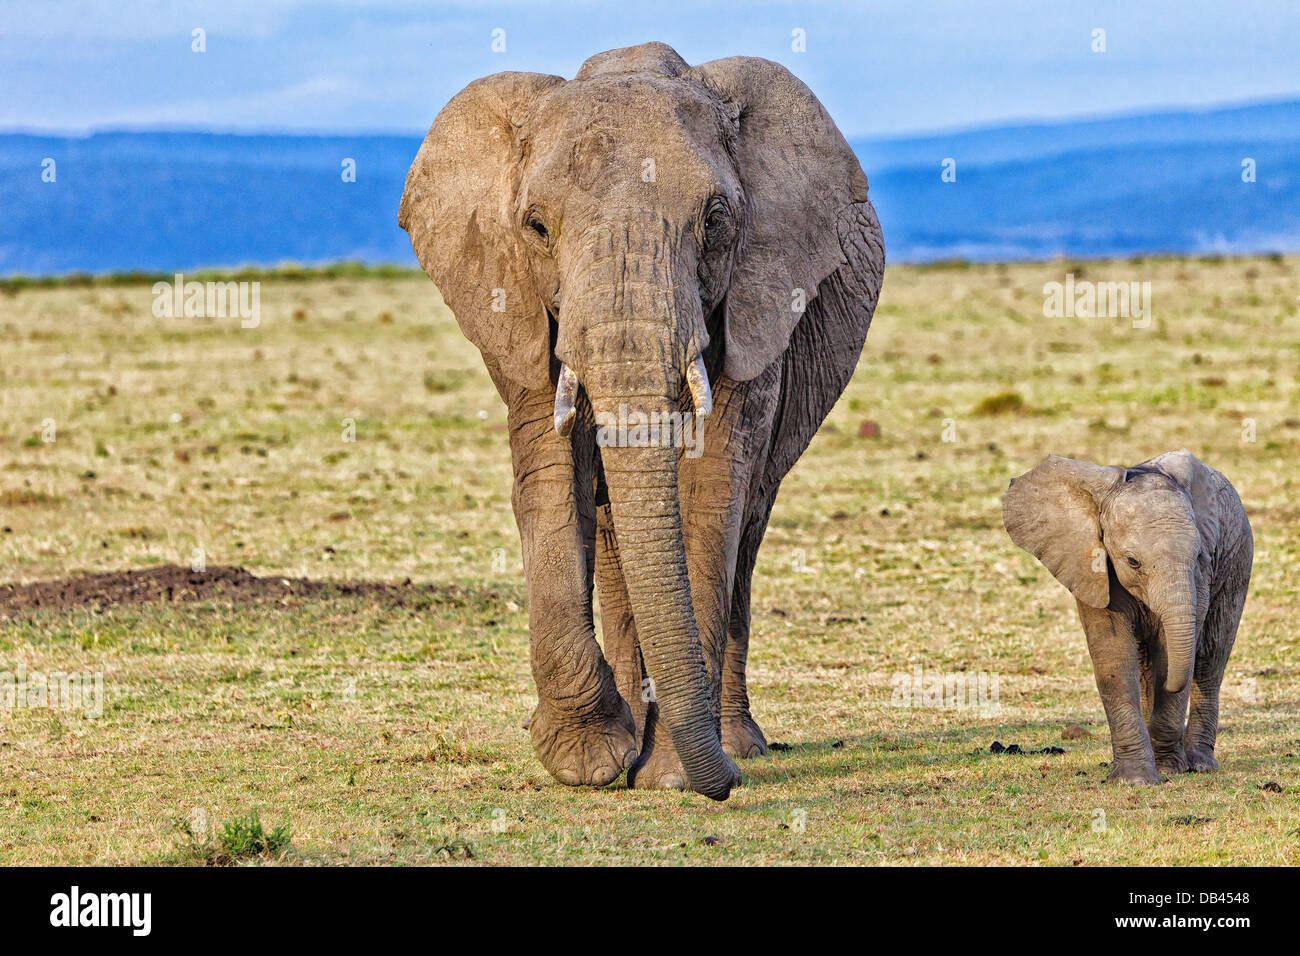 Mother and Baby Elephant walking side-by-side at the Masai Mara Wildlife Reserve, Kenya, Africa Stock Photo